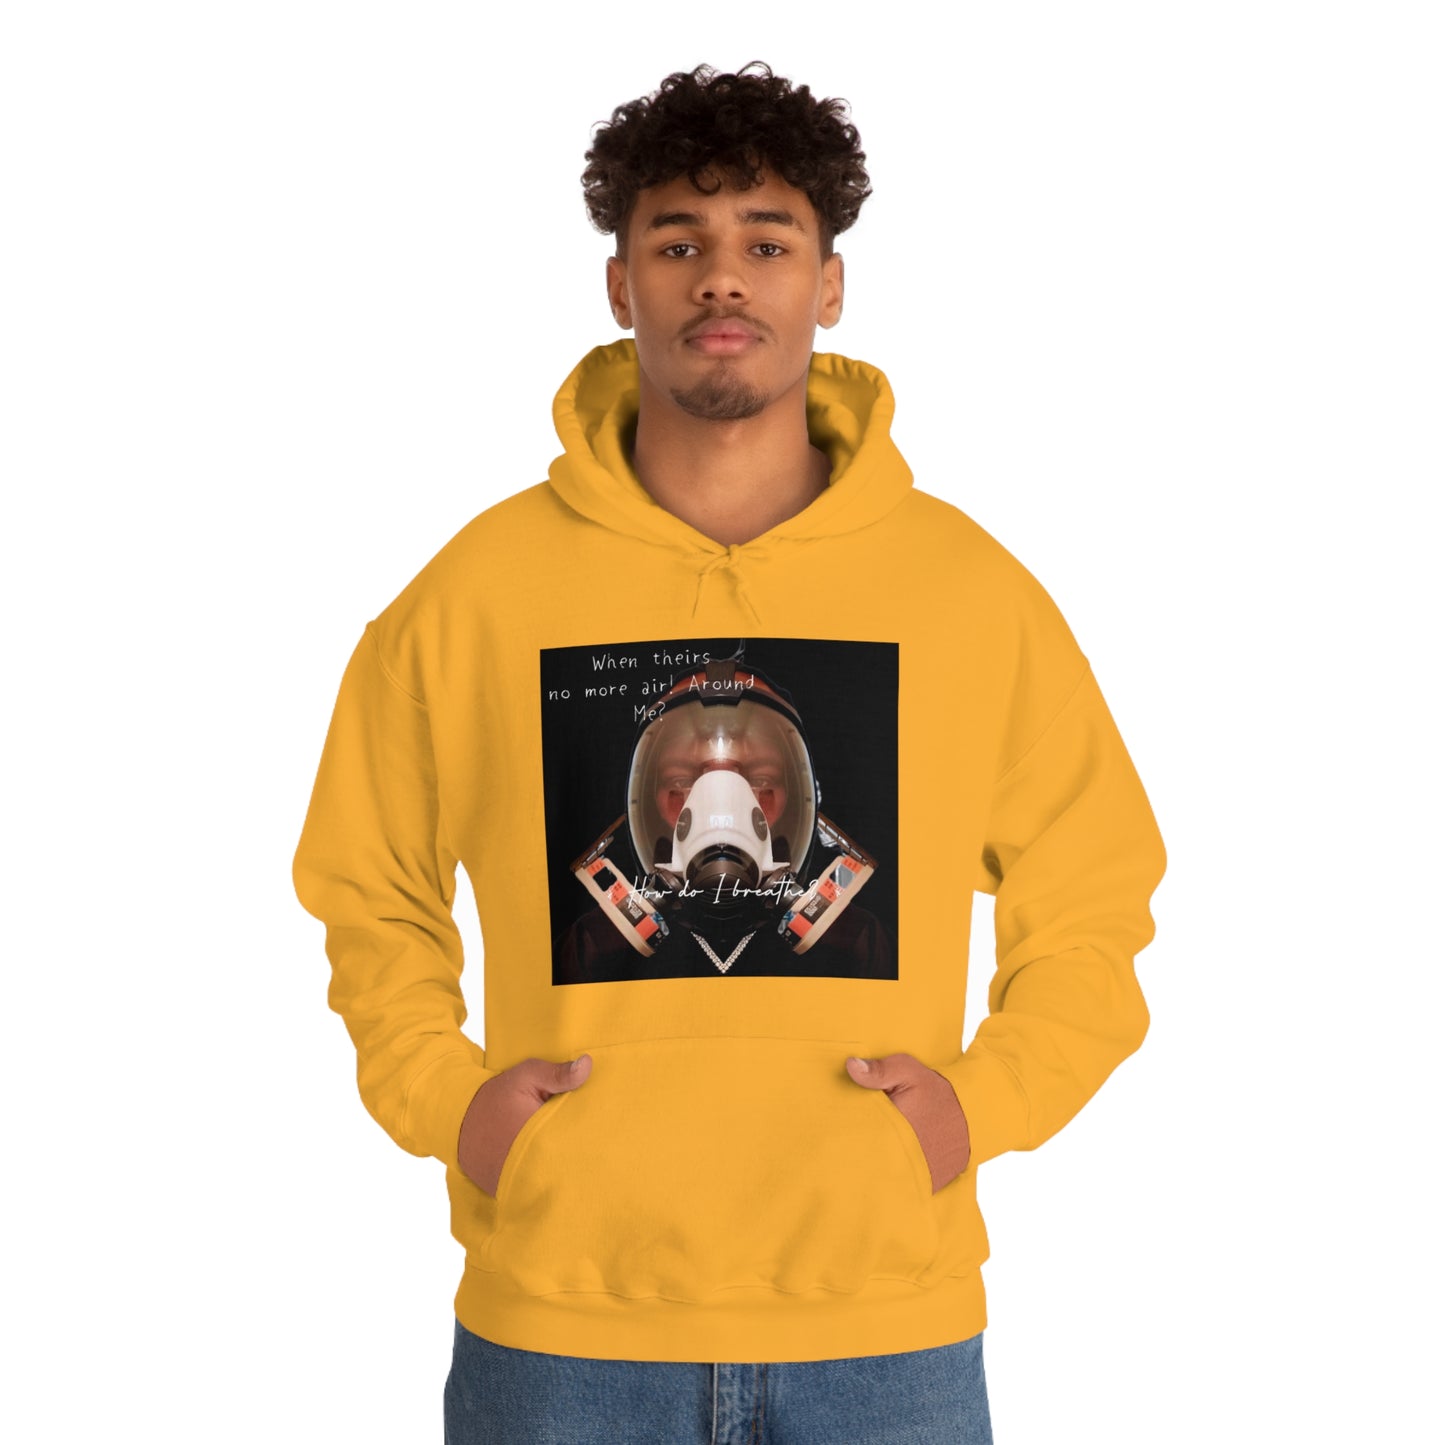 Unisex Heavy Blend™ Hooded Sweatshirt. by LionEl (How Do I Breathe)